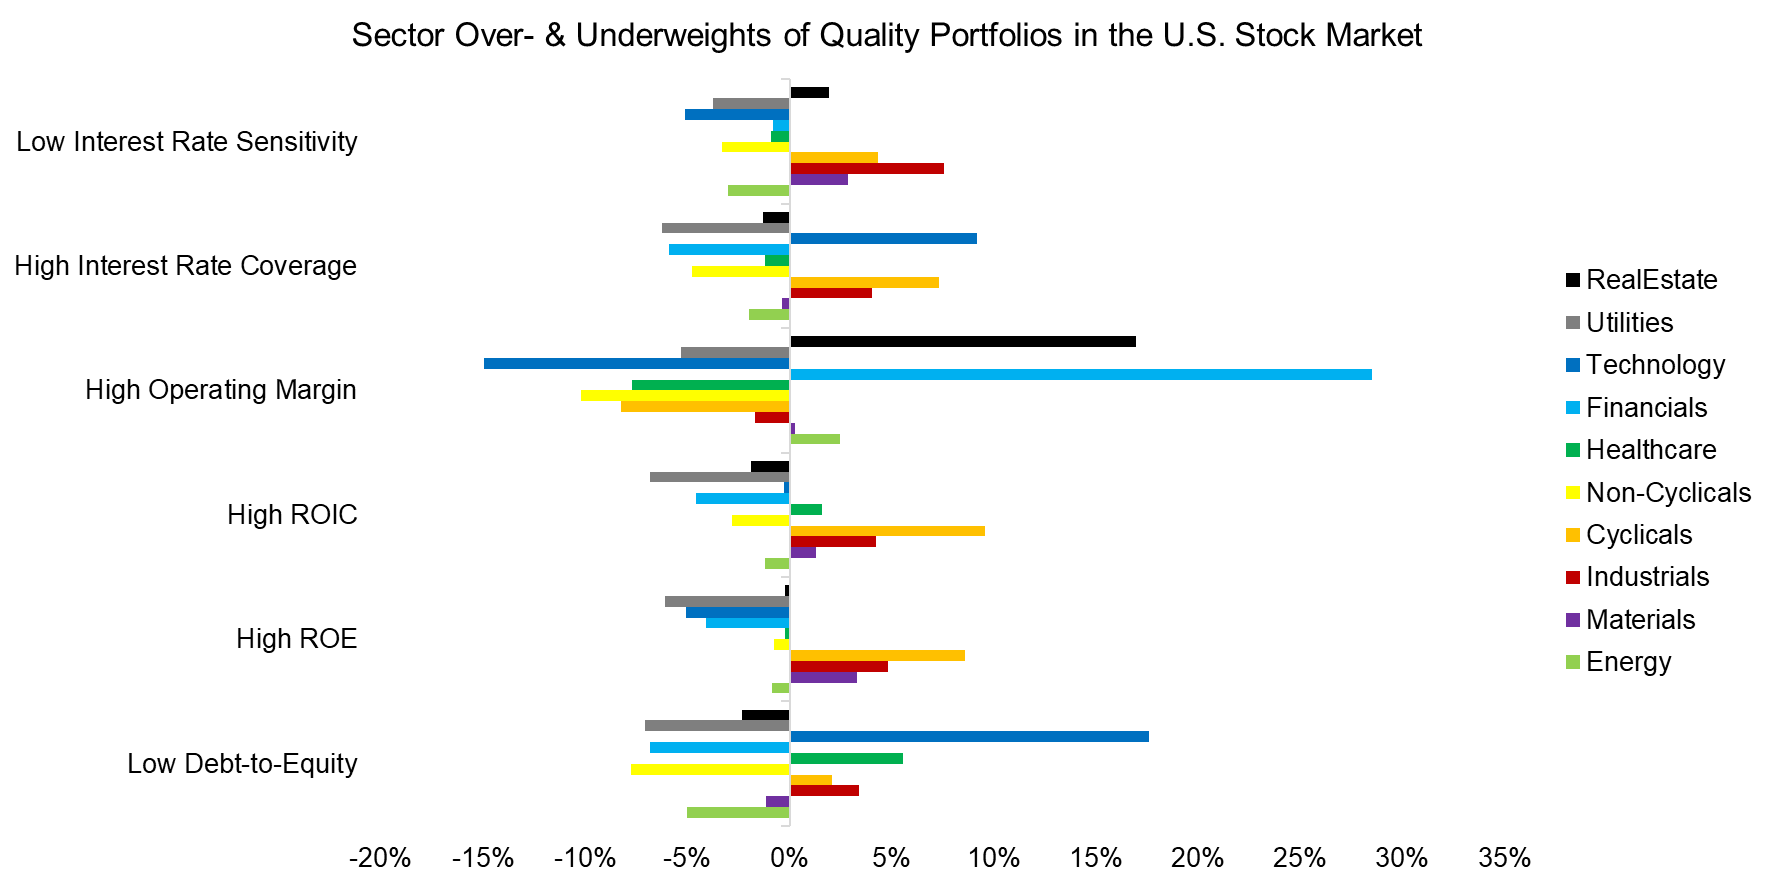 Sector Over- & Underweights of Quality Portfolios in the U.S. Stock Market